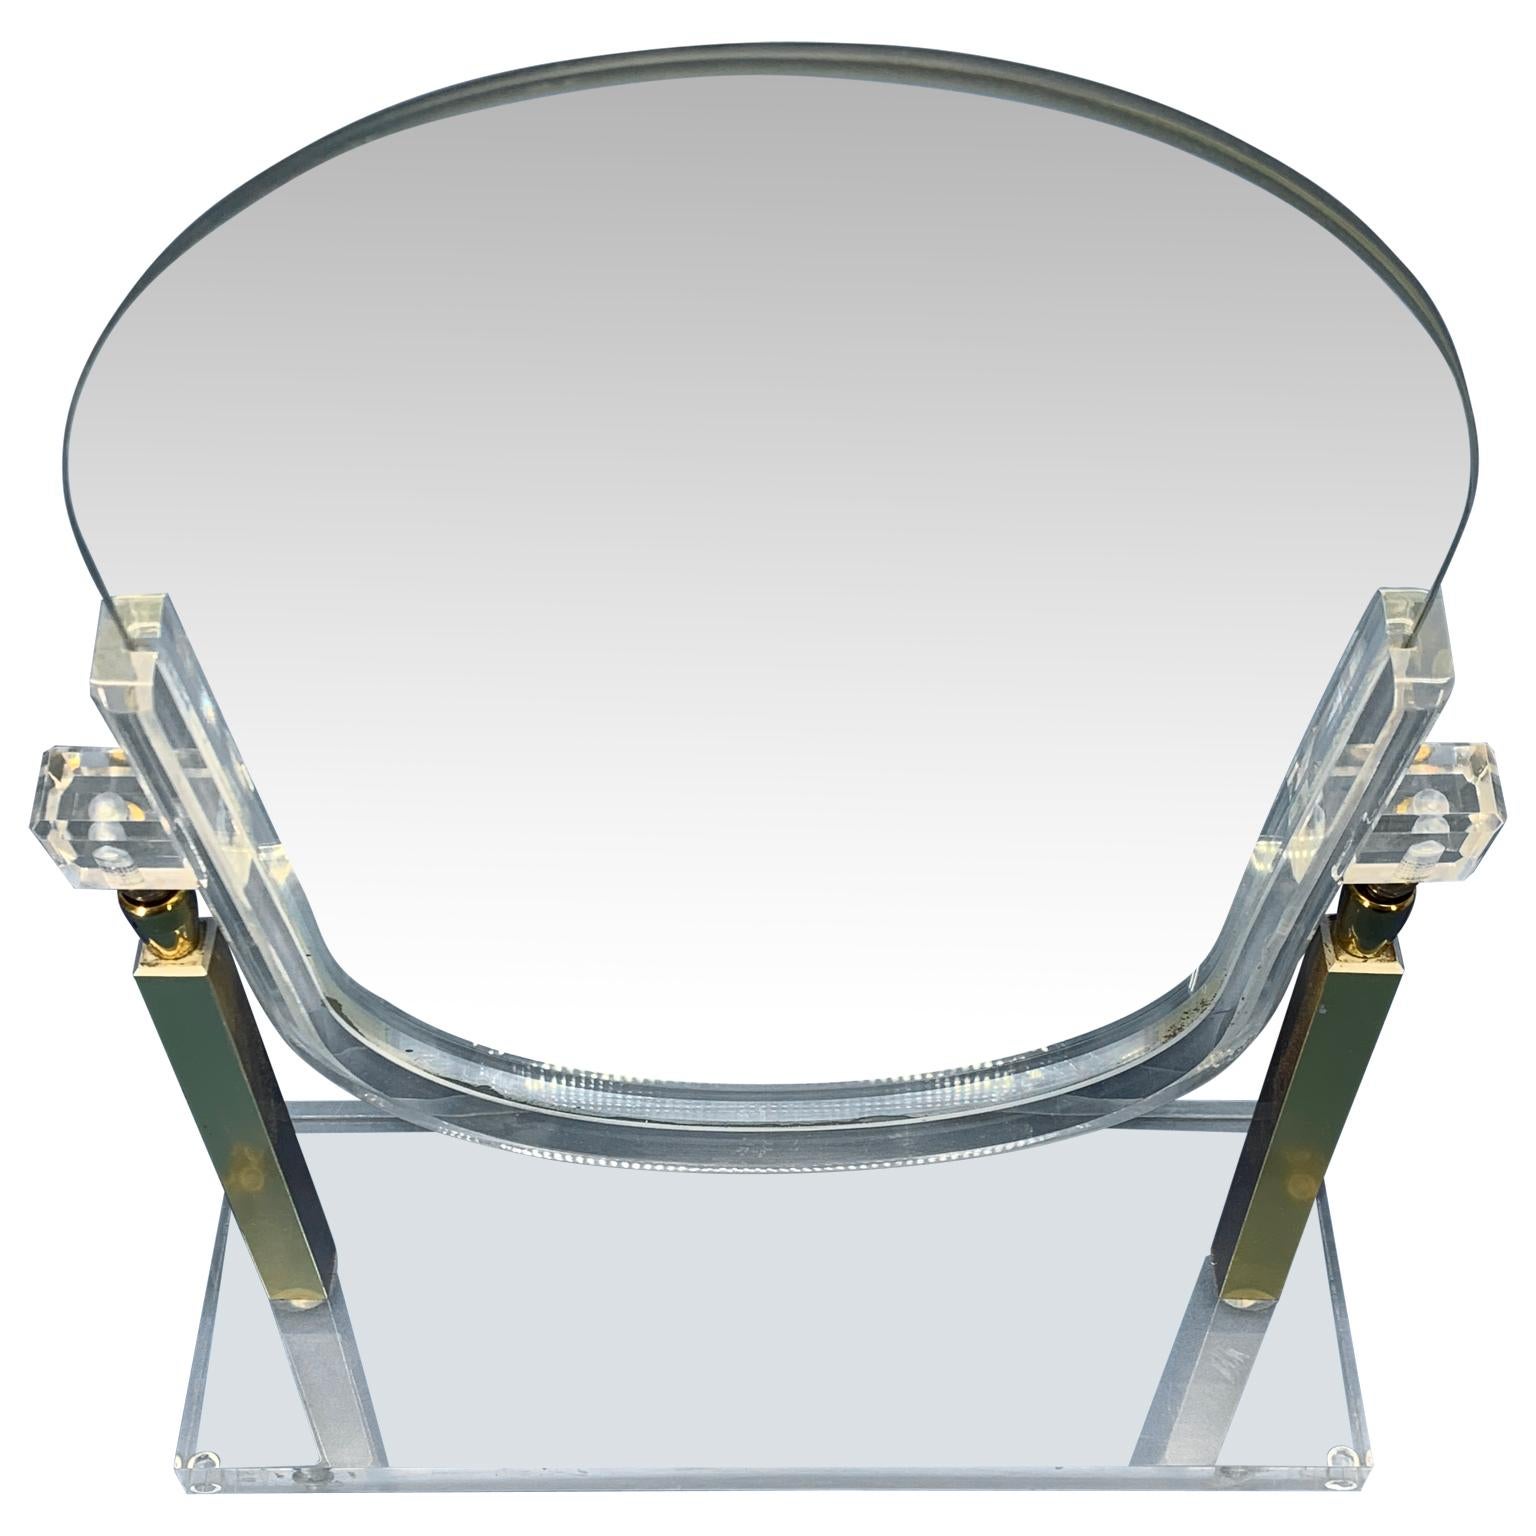 Vintage Charles Hollis Jones style Lucite and brass tabletop vanity mirror. 1960's era classic Mid-Century Modern double sided mirror. This glamorous mirror is perfect as a make-up mirror or dressing table mirror. The polished lucite glows in the